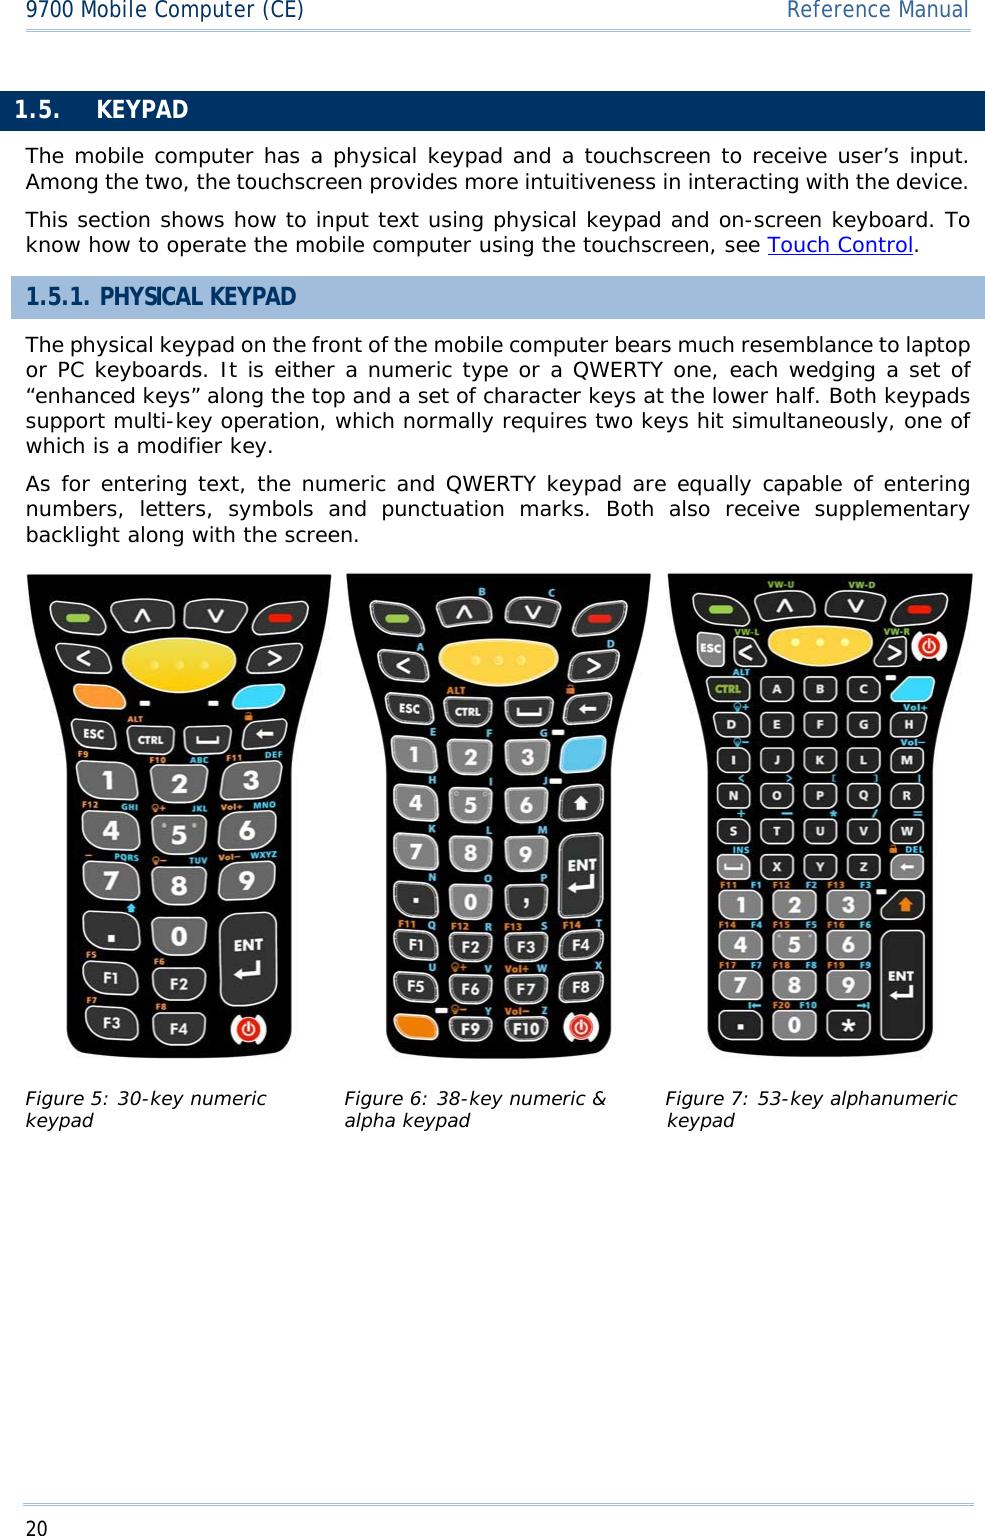 209700 Mobile Computer (CE)  Reference Manual1.5. KEYPADThe mobile computer has a physical keypad and a touchscreen to receive user’s input. Among the two, the touchscreen provides more intuitiveness in interacting with the device. This section shows how to input text using physical keypad and on-screen keyboard. To know how to operate the mobile computer using the touchscreen, see Touch Control.1.5.1. PHYSICAL KEYPAD The physical keypad on the front of the mobile computer bears much resemblance to laptop or PC keyboards. It is either a numeric type or a QWERTY one, each wedging a set of “enhanced keys” along the top and a set of character keys at the lower half. Both keypads support multi-key operation, which normally requires two keys hit simultaneously, one of which is a modifier key. As for entering text, the numeric and QWERTY keypad are equally capable of entering numbers, letters, symbols and punctuationʳmarks. Both also receive supplementary backlight along with the screen.  Figure 5: 30-key numeric keypad Figure 6: 38-key numeric &amp; alpha keypad  Figure 7: 53-key alphanumeric keypad